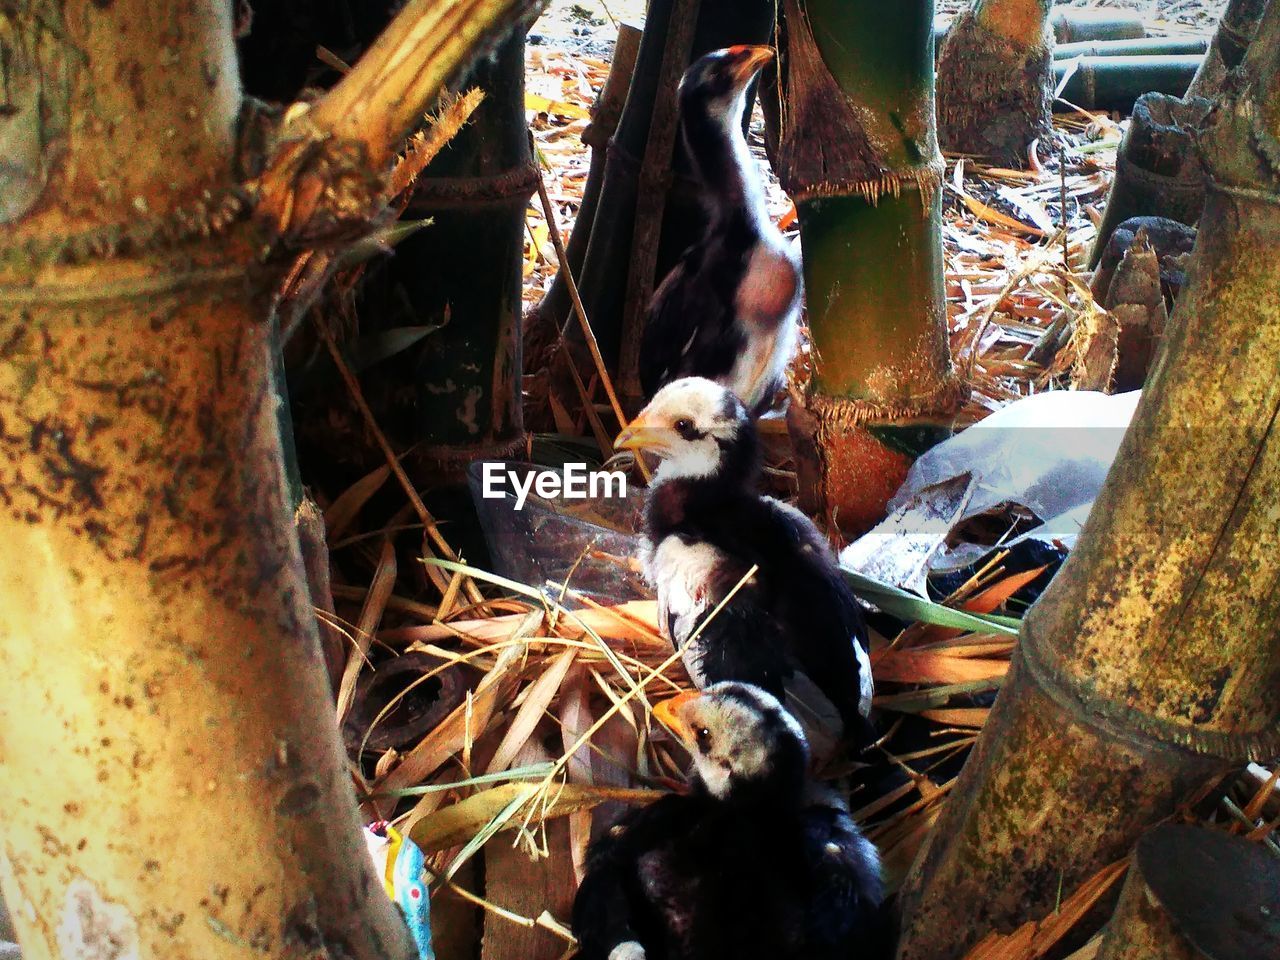 VIEW OF BIRDS PERCHING ON NEST